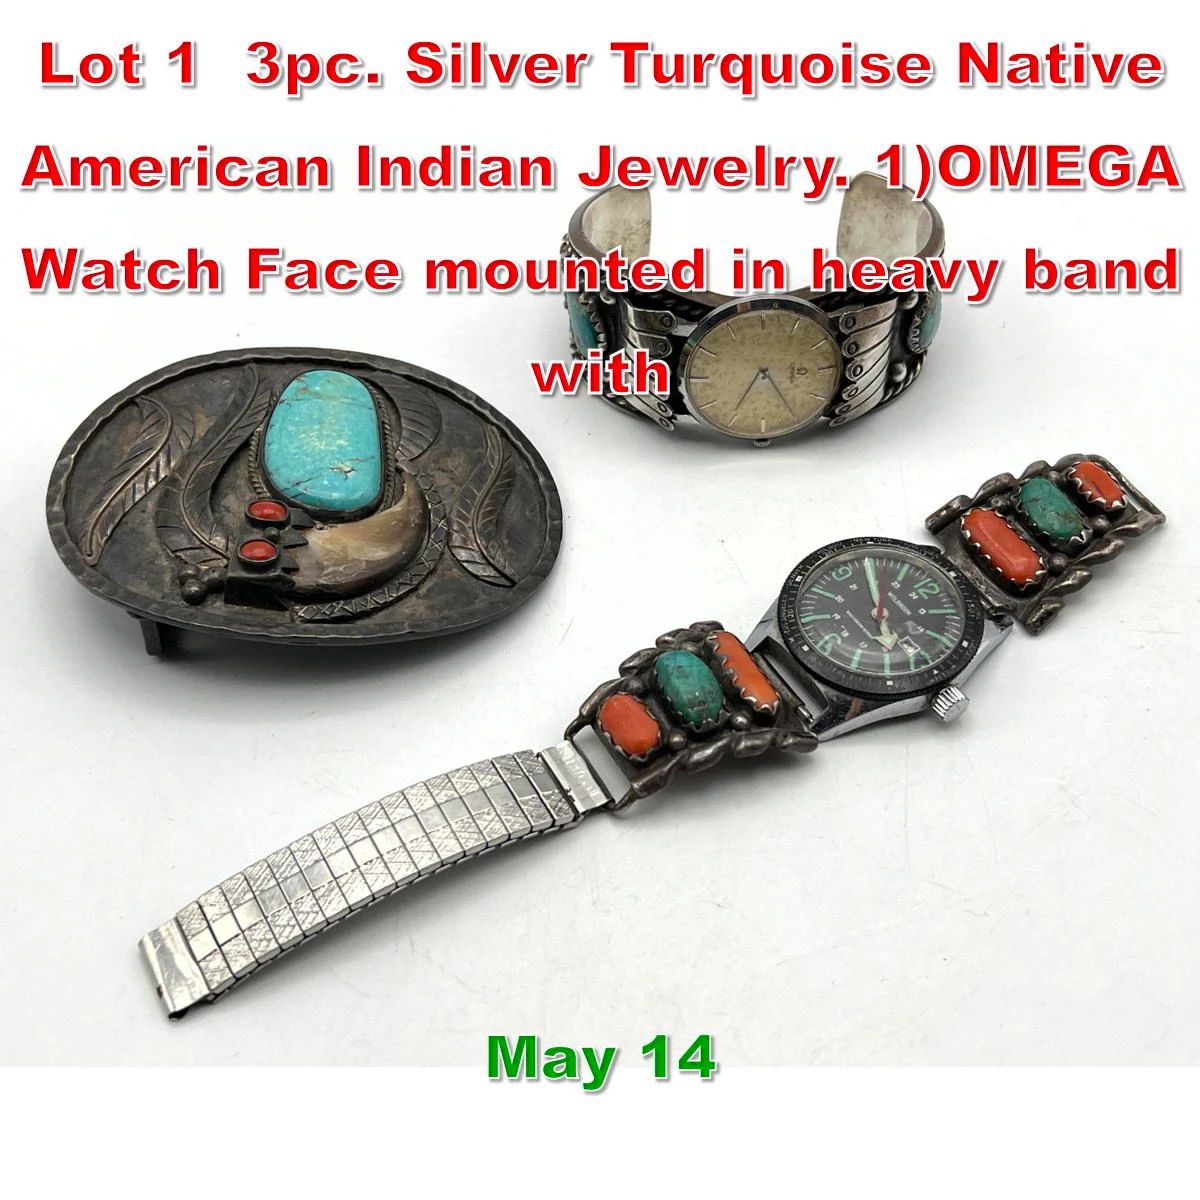 Lot 1 3pc. Silver Turquoise Native American Indian Jewelry. 1OMEGA Watch Face mounted in heavy band with 